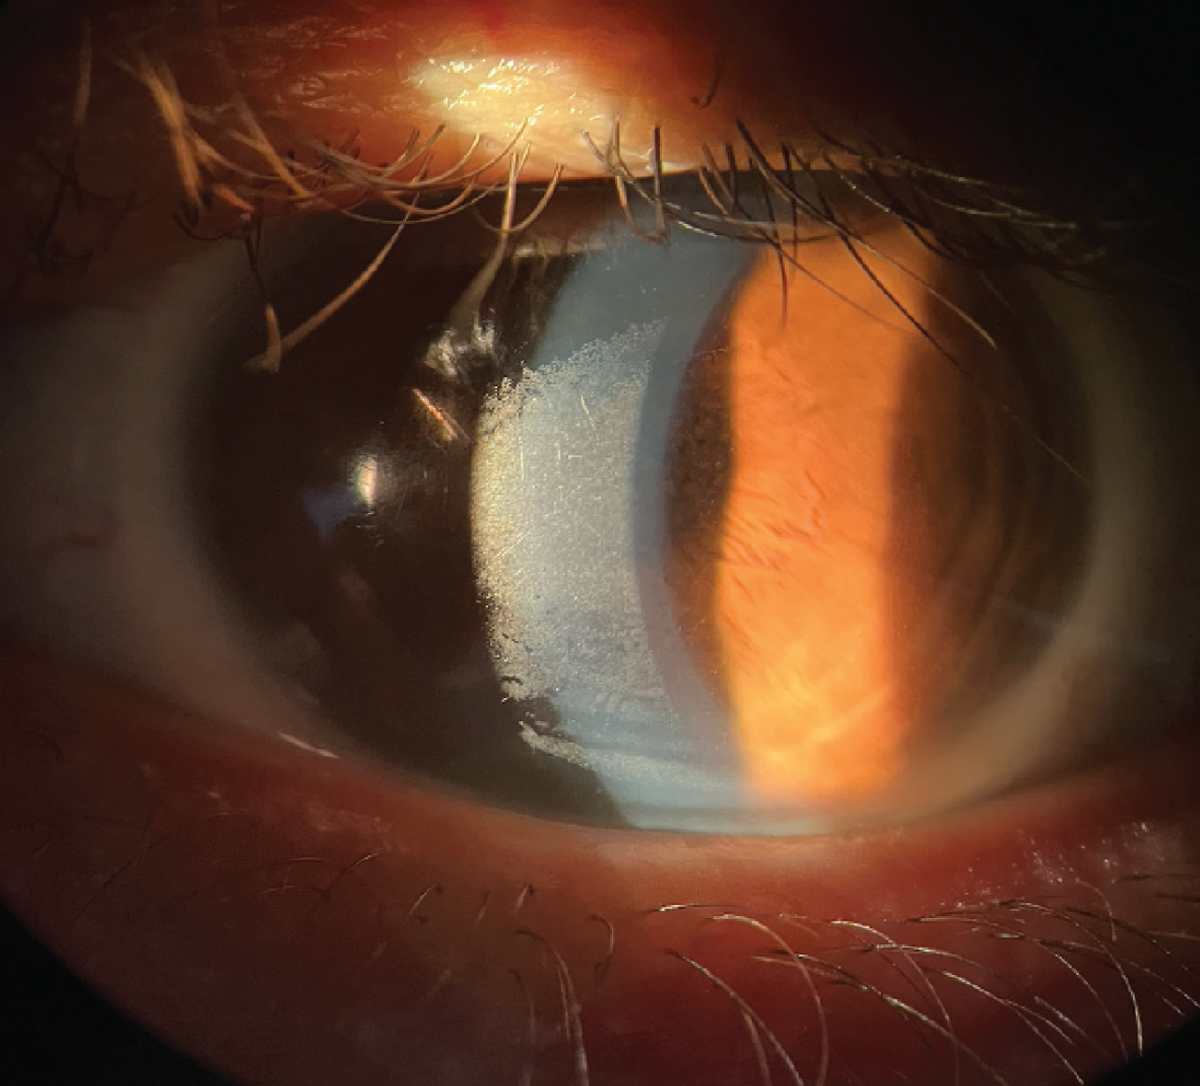 Build-up on a scleral lens surface can form from a poor tear film.